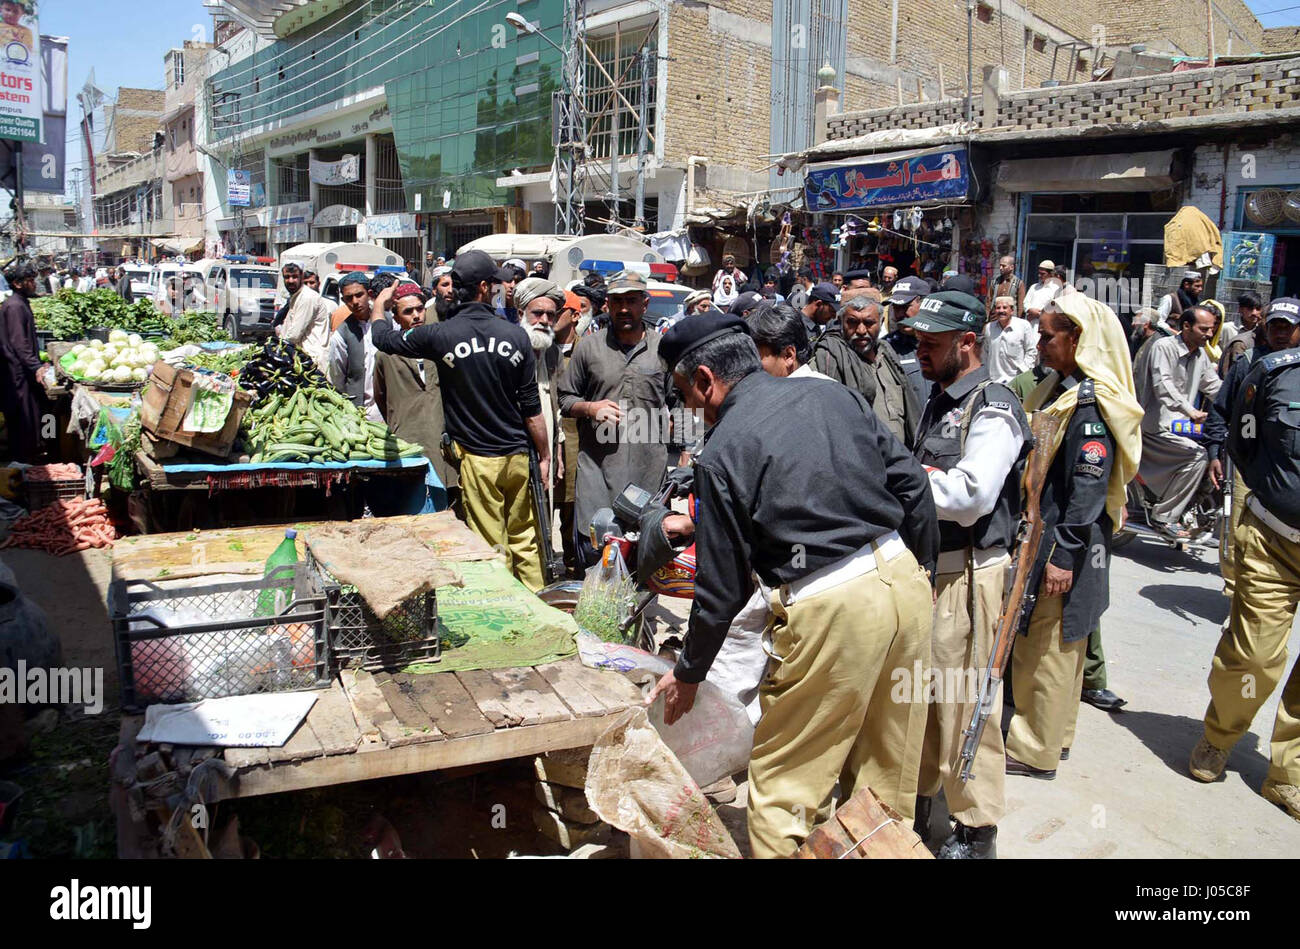 Quetta, Pakistan. 10th Apr, 2017. Views during anti encroachment drive operated by Quetta Traffic Police Department led by Senior Superintendent Police Quetta (SSP) Traffic Muhammad Javed Malik and DSP Traffic Shabana, at Kasi road of Quetta on Monday, April 10, 2017. Credit: Asianet-Pakistan/Alamy Live News Stock Photo